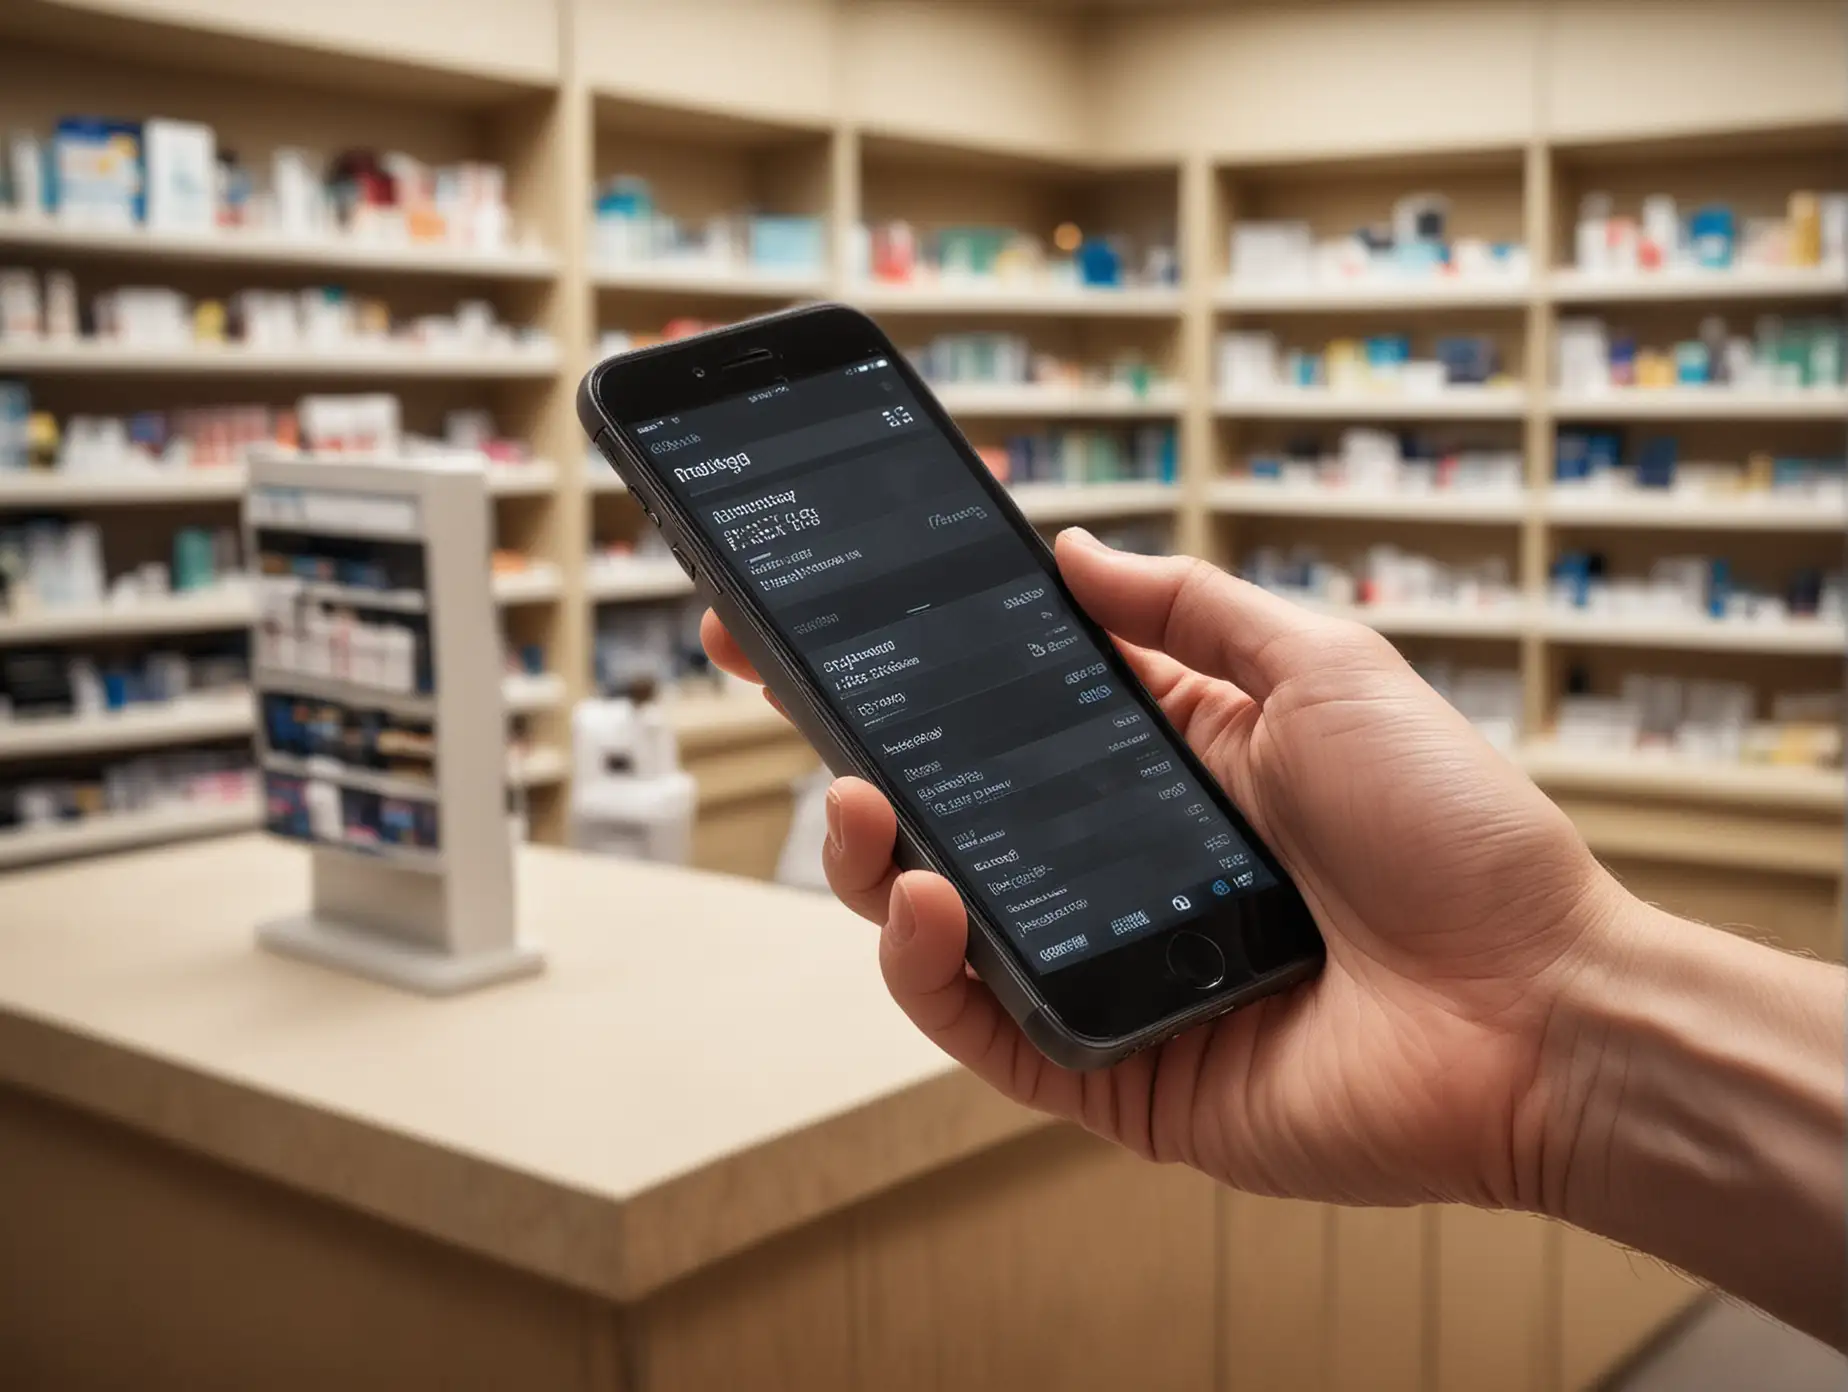 Hand Making Pharmacy Payment with iPhone at Modern Checkout Terminal